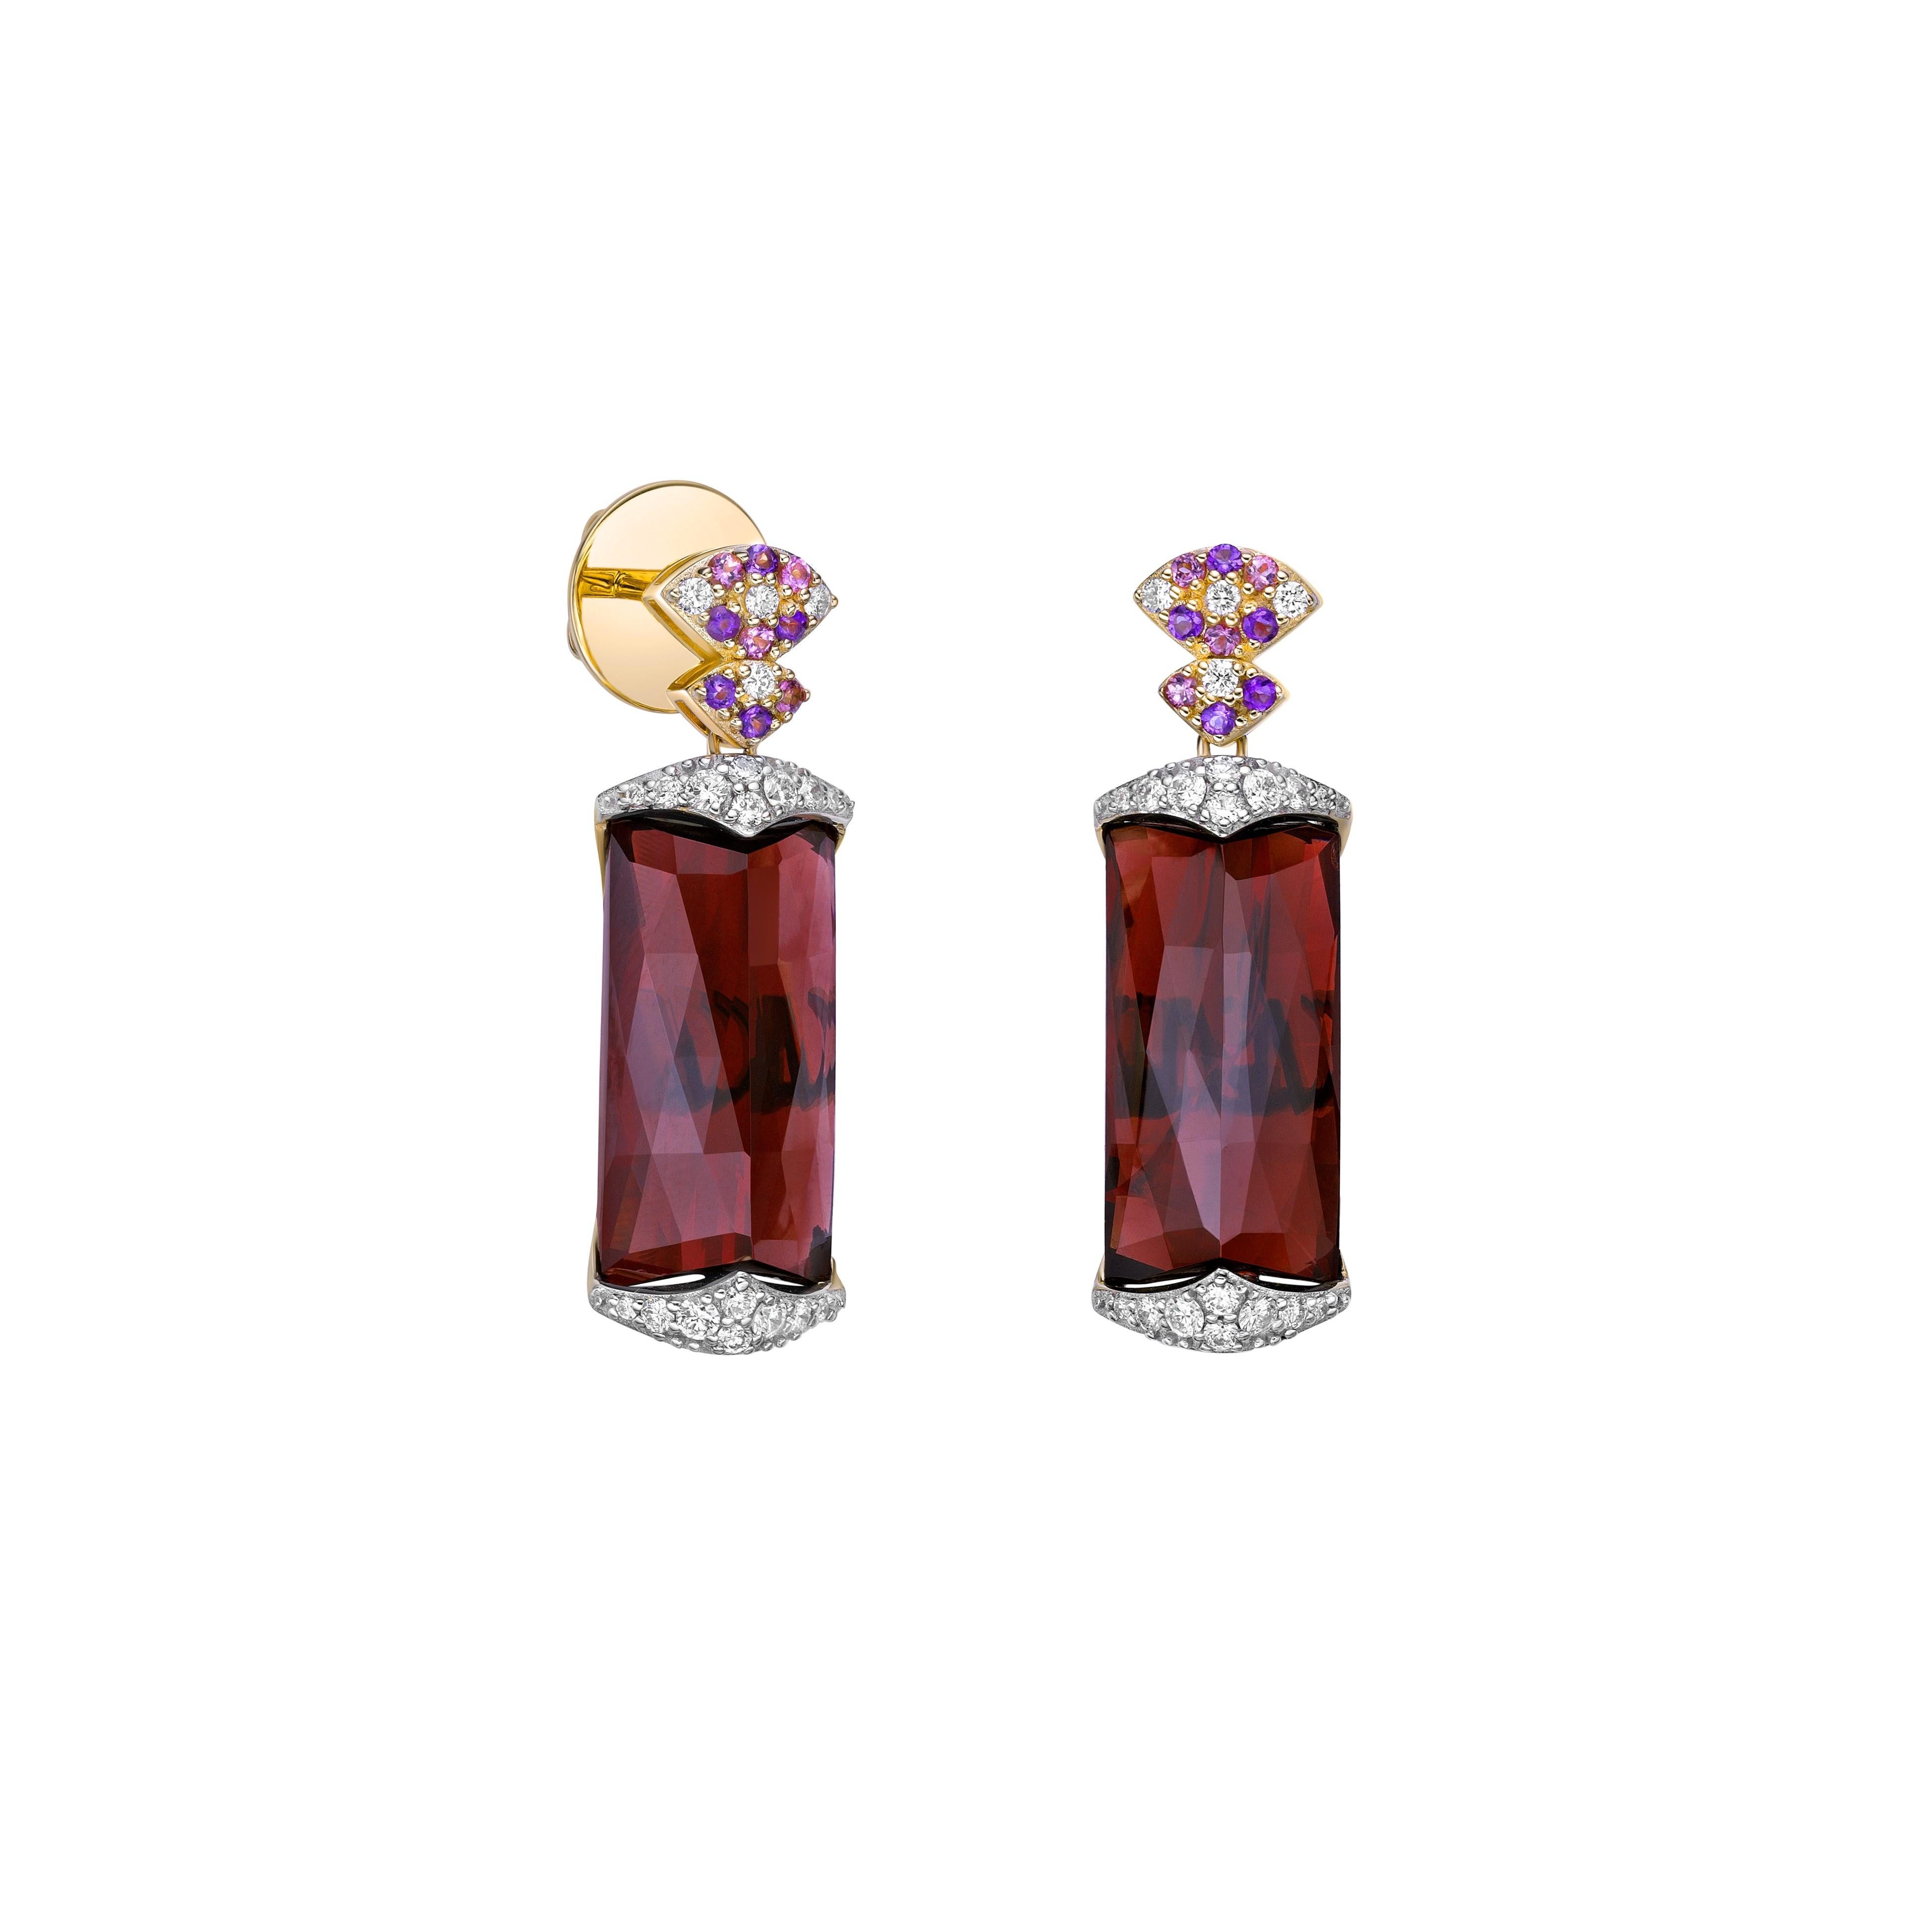 Presented A lovely Drop Earrings of Garnet and Honey Quartz is perfect for people who want to wear it to any occasion or celebration. Its captivating garnet, amethyst, pink tourmaline and brilliant diamonds set in 18karat yellow gold, intended to